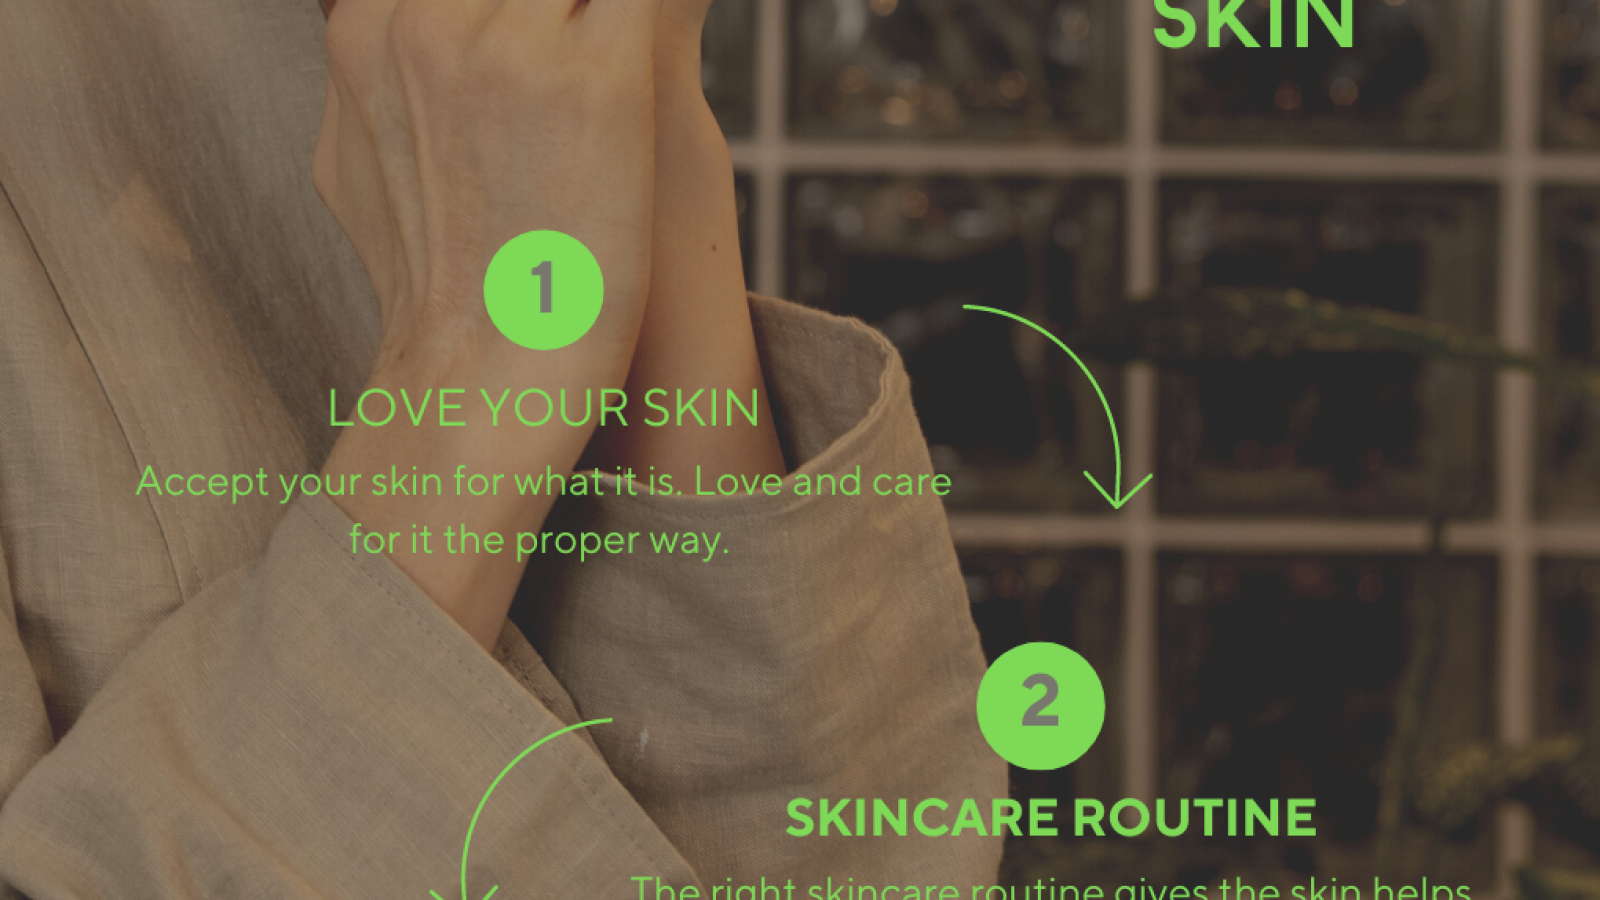  HEALTHY SKIN AND 3 PROPER WAYS TO MAINTAIN IT. 